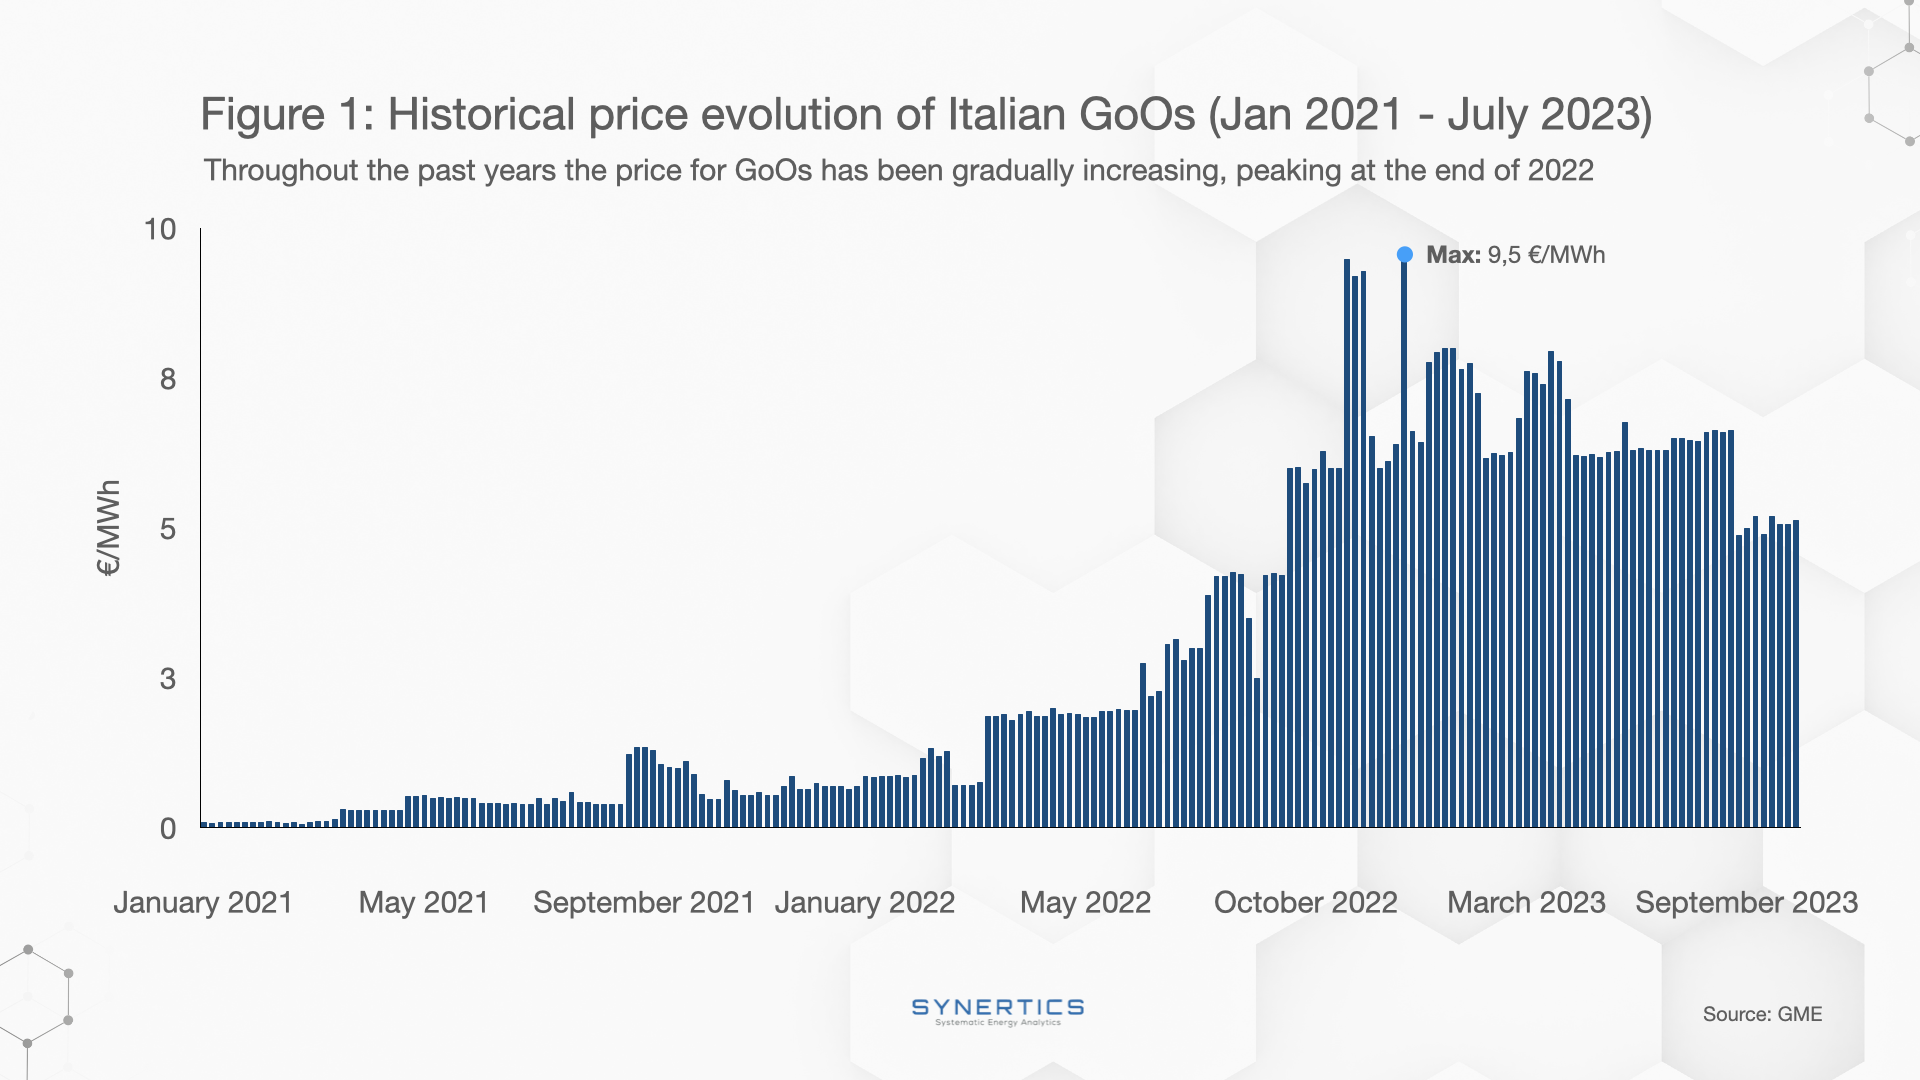 Historical price evolution of GoOs in Europe